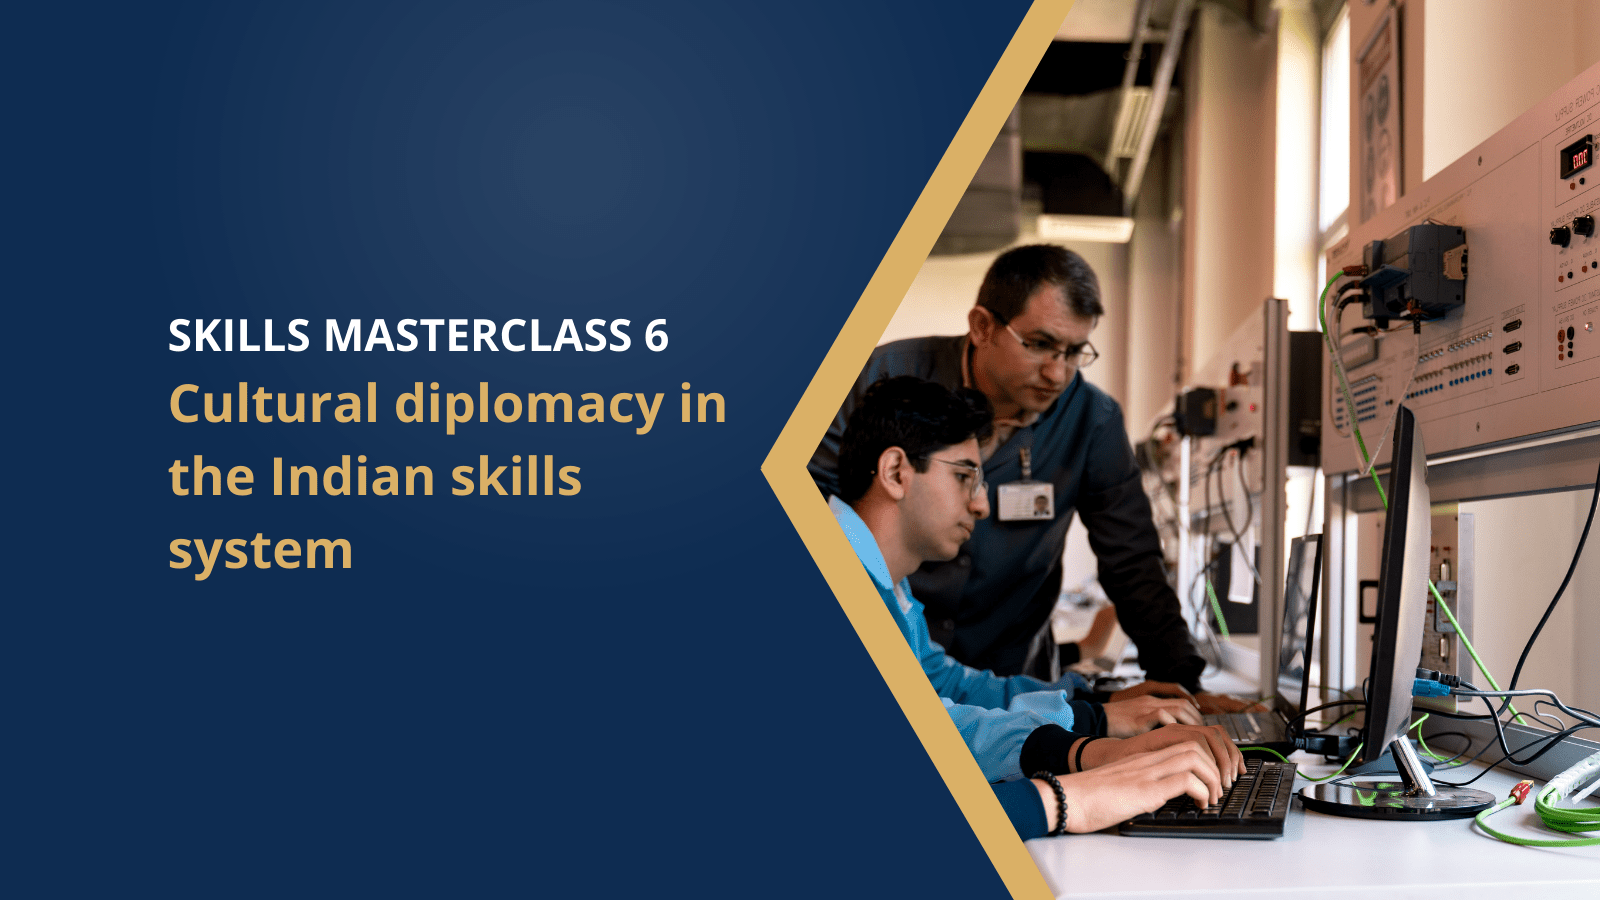 Skills Masterclass 6: Cultural diplomacy in the Indian skills system